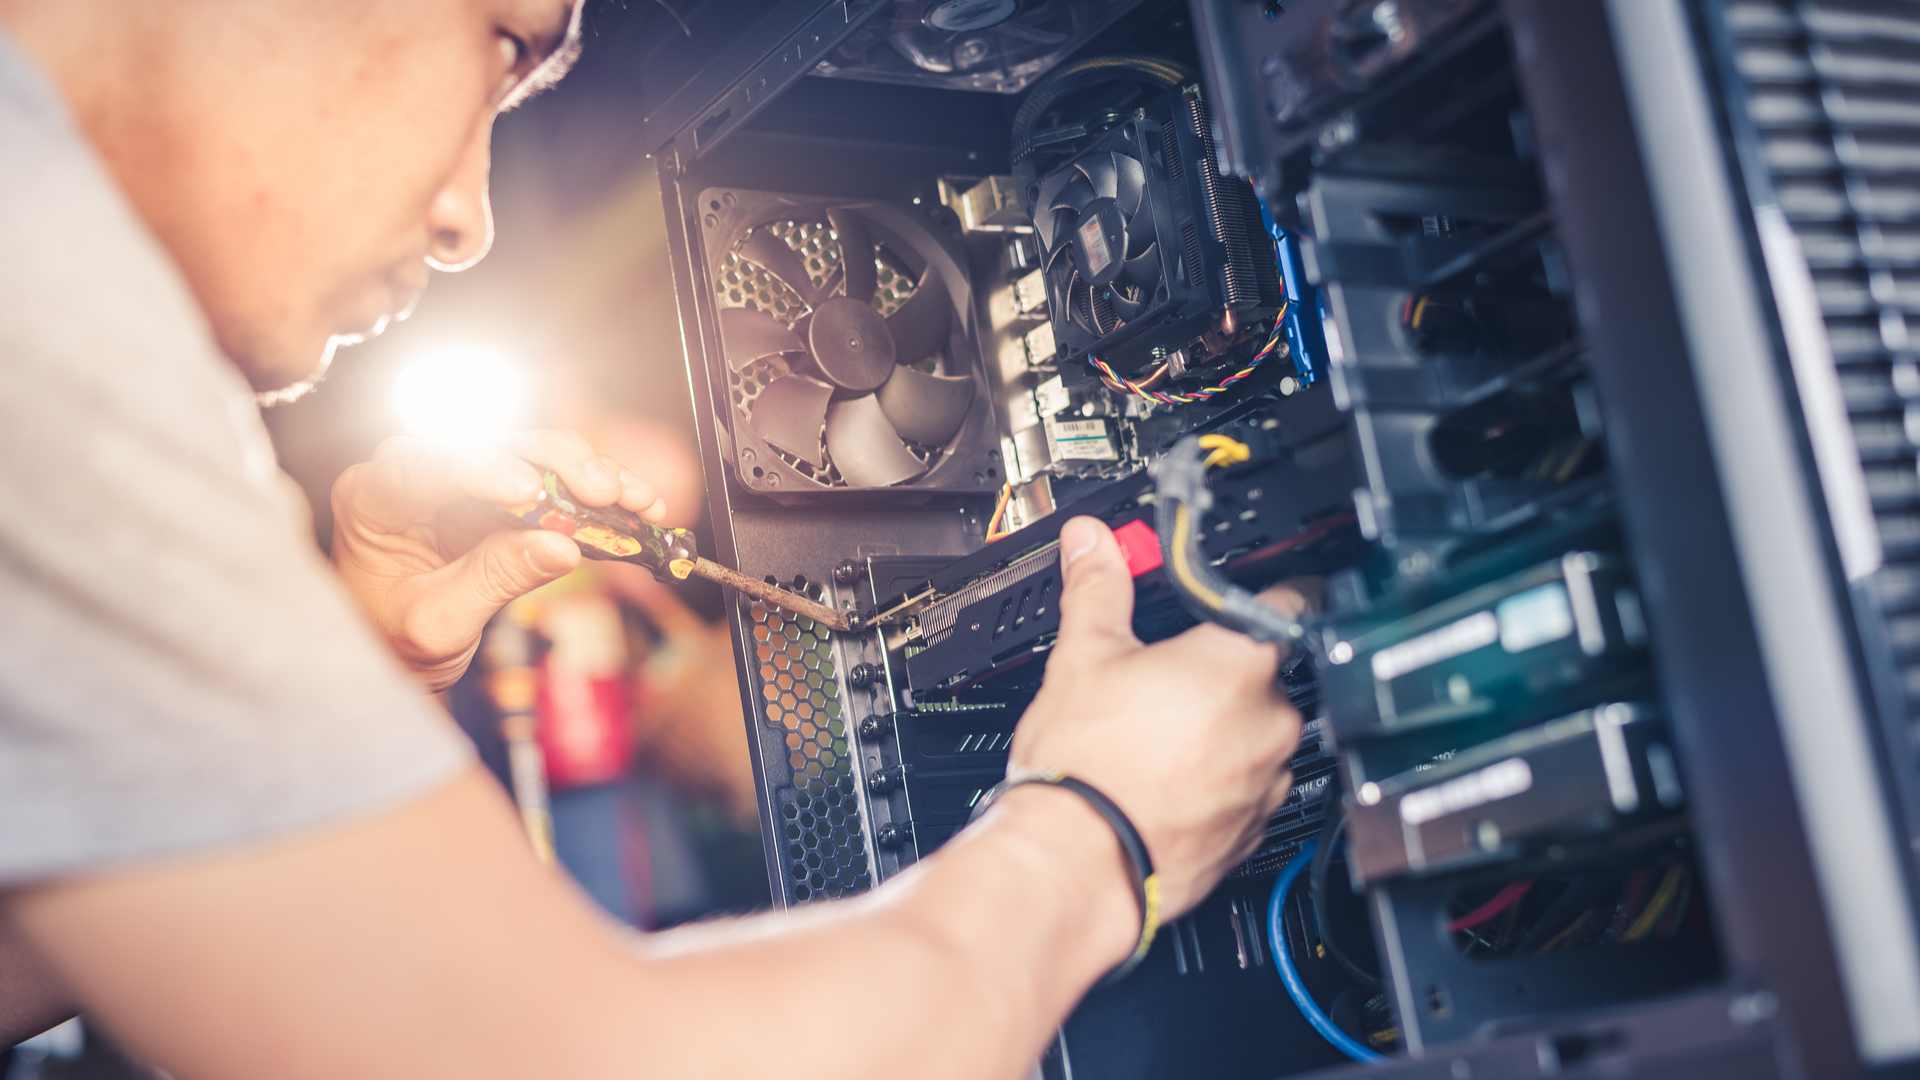 Top PC Upgrades for Improved Performance